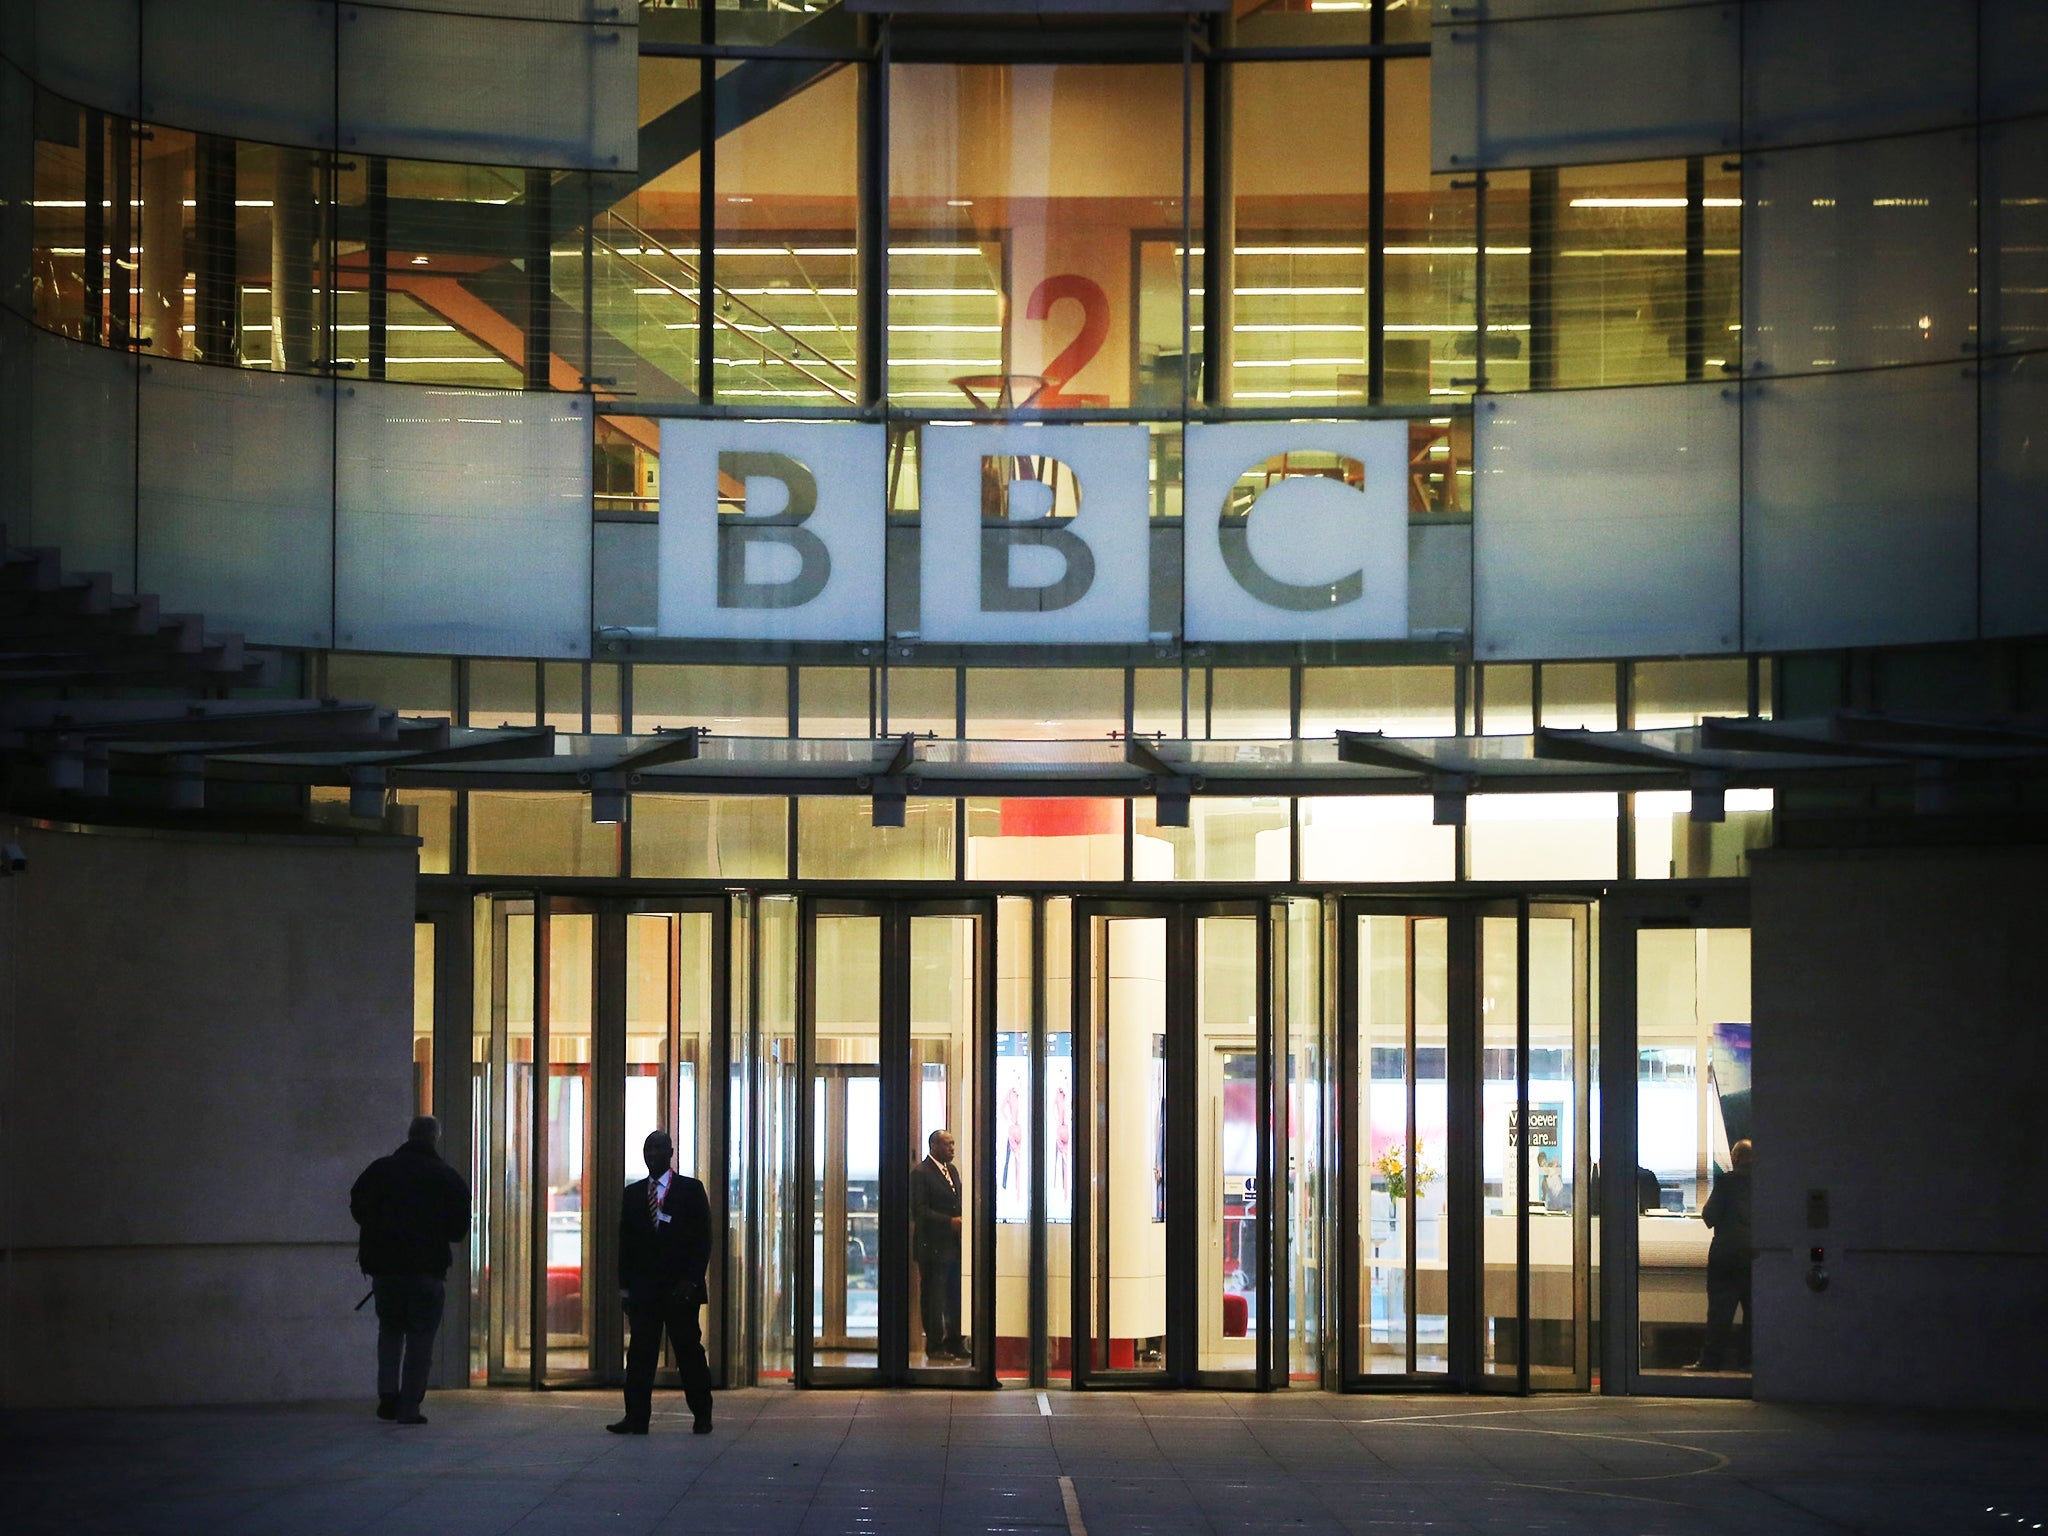 The attack on the BBC’s funding model, using faux compassion and the language of progressives, is entirely dishonest